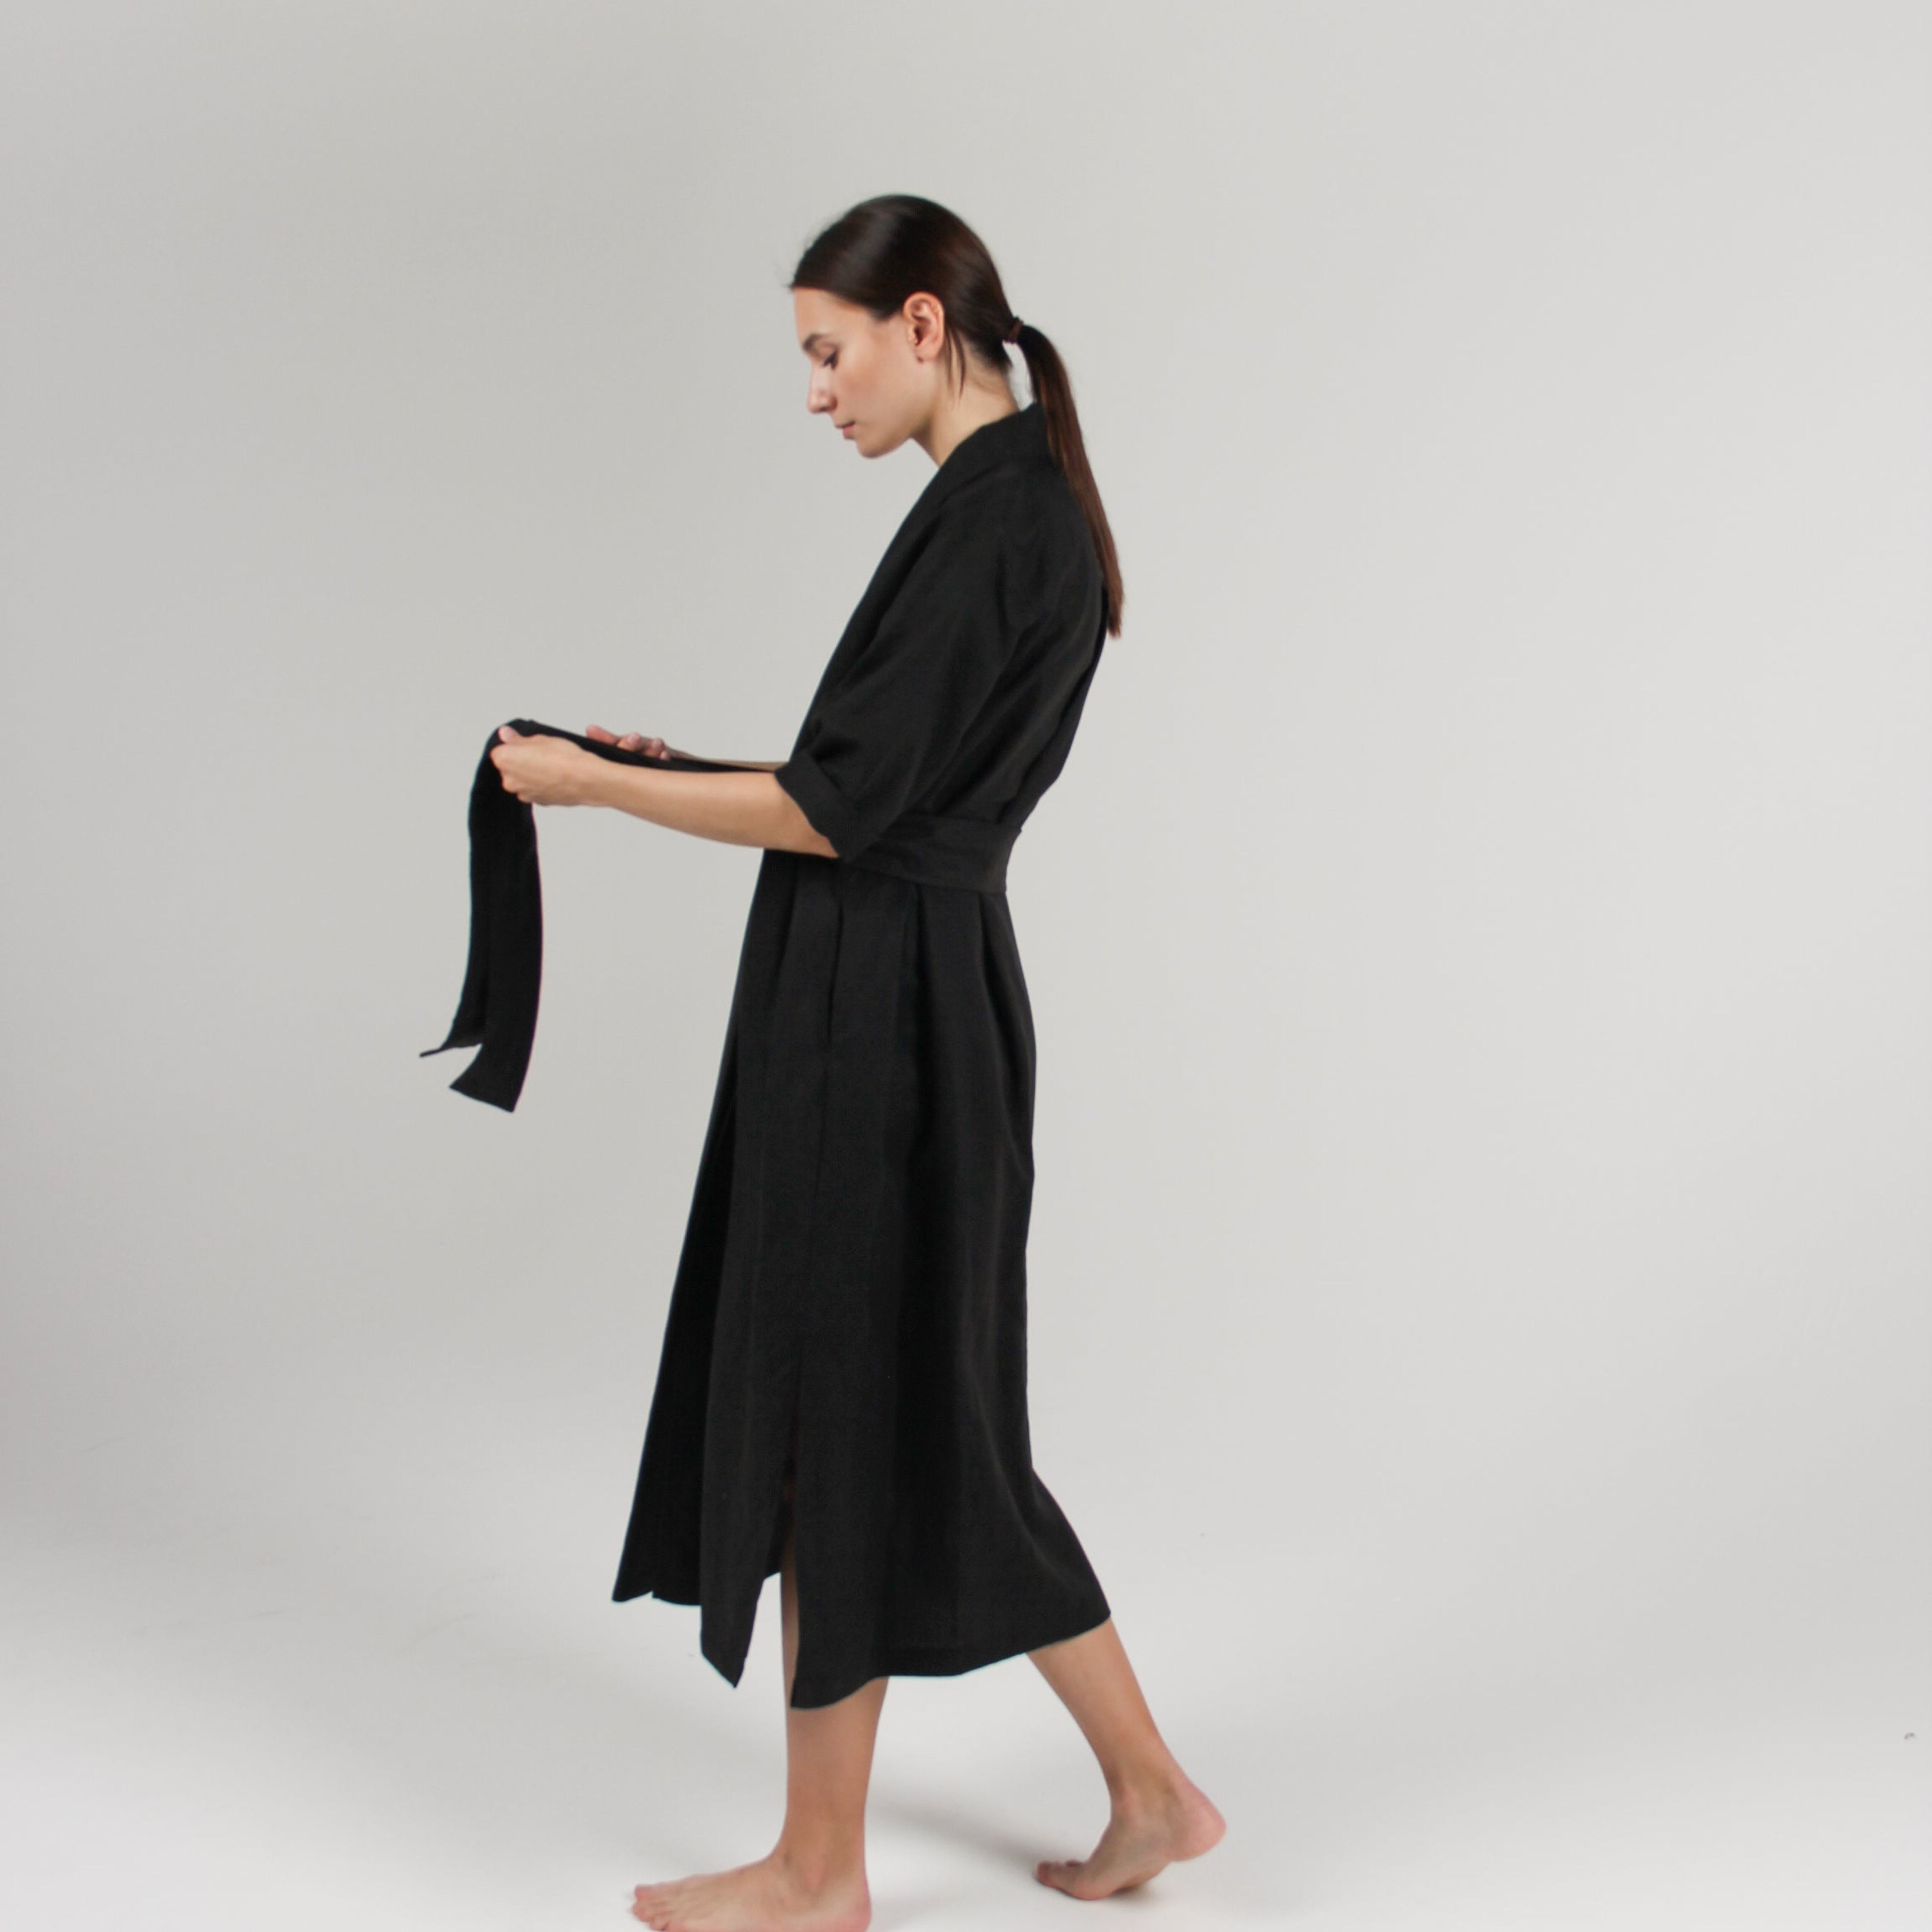 The Convertible Wrap Dress in Jet Black